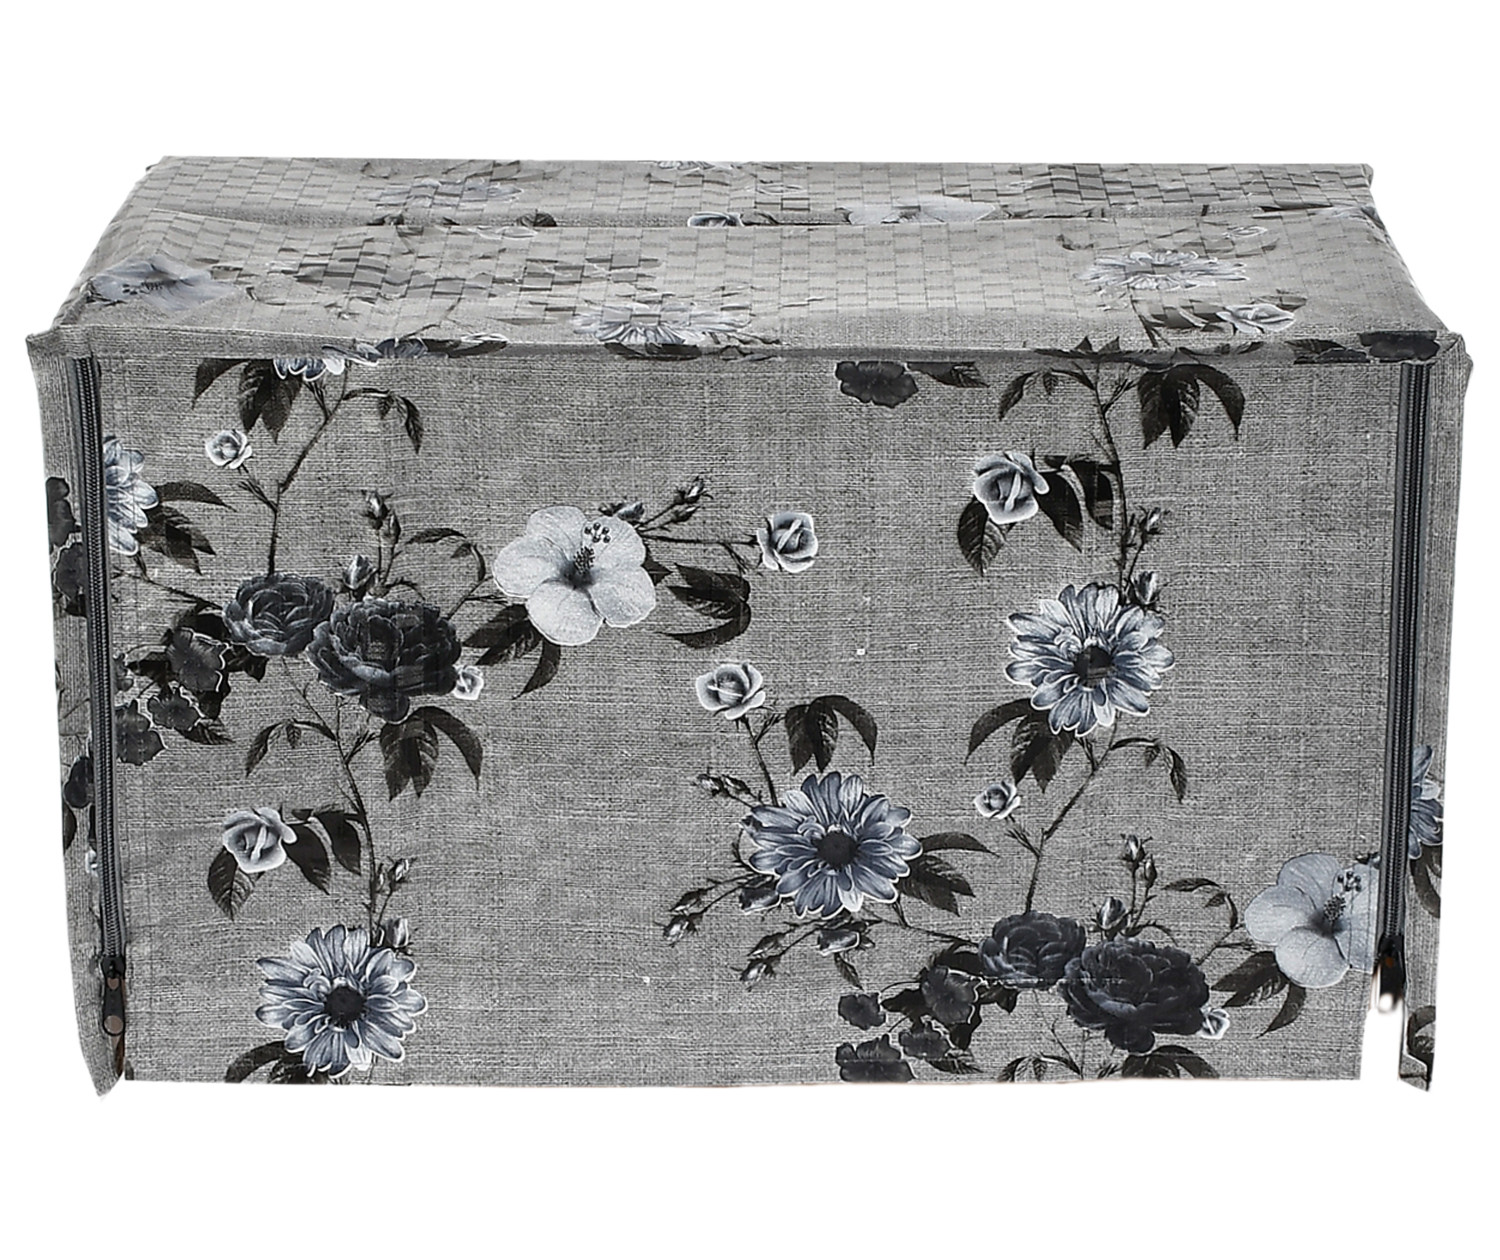 Kuber Industries PVC Flower Printed Microwave Oven Cover, Dustproof Machine Protector Cover,20 Ltr. (Grey)